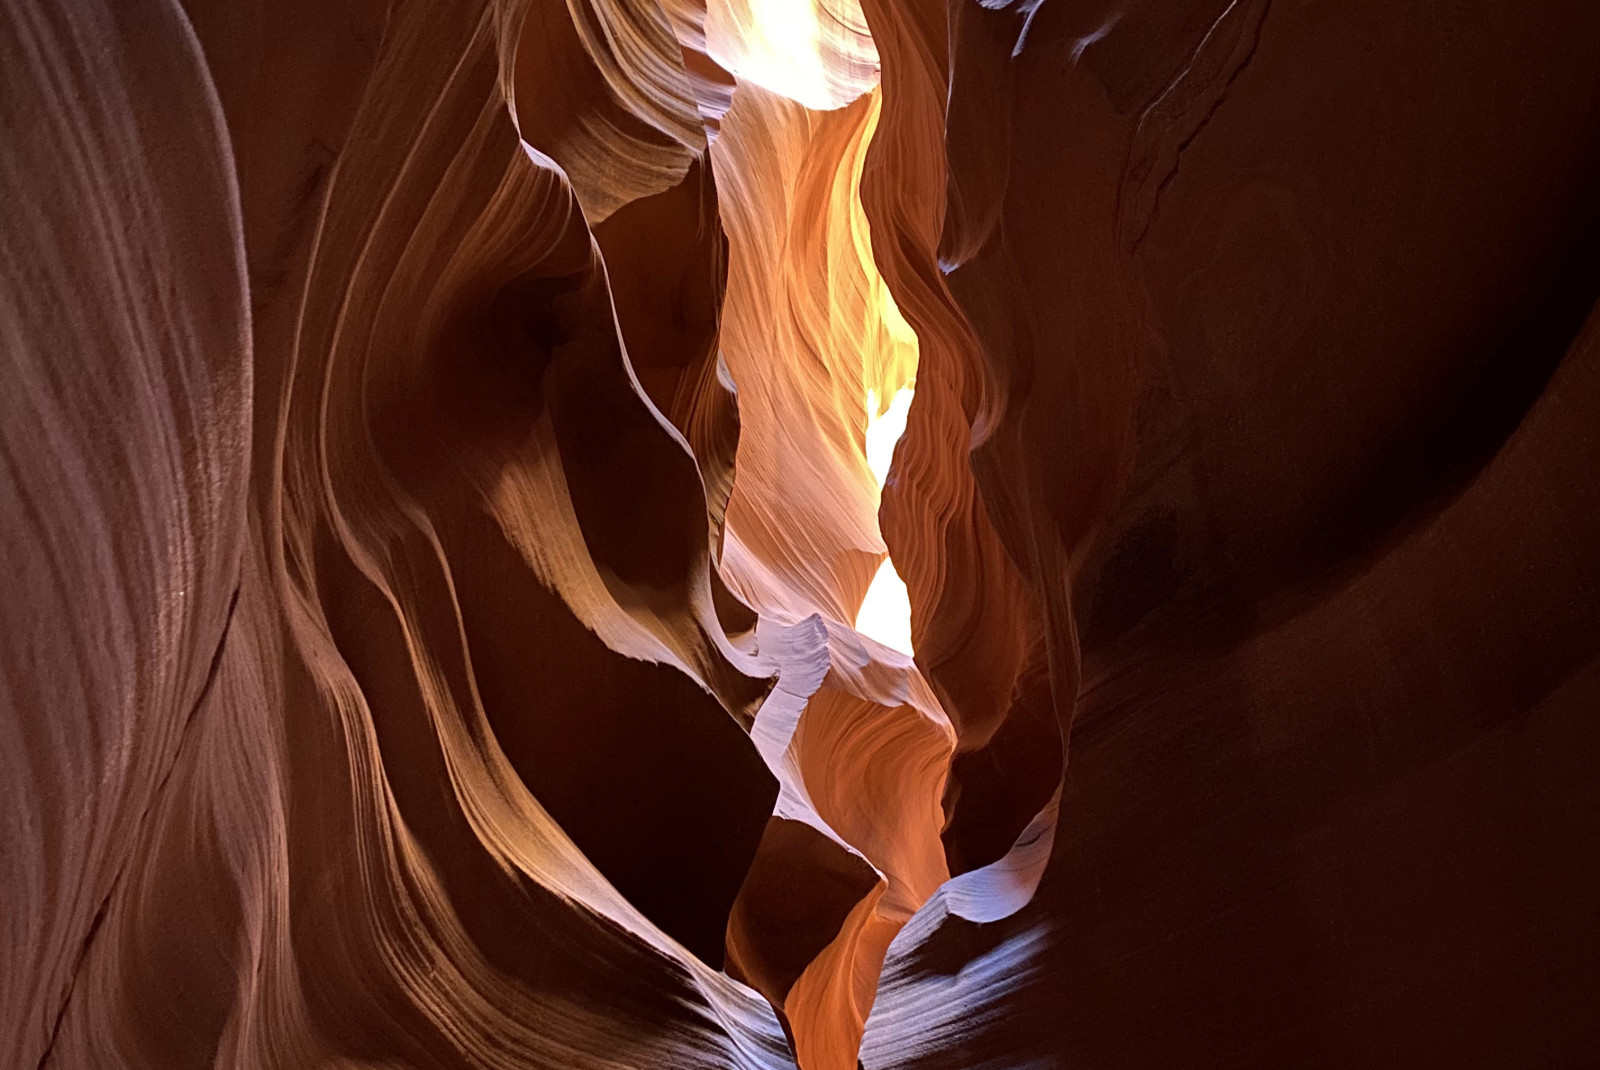 Red canyon with sunlight filtering in